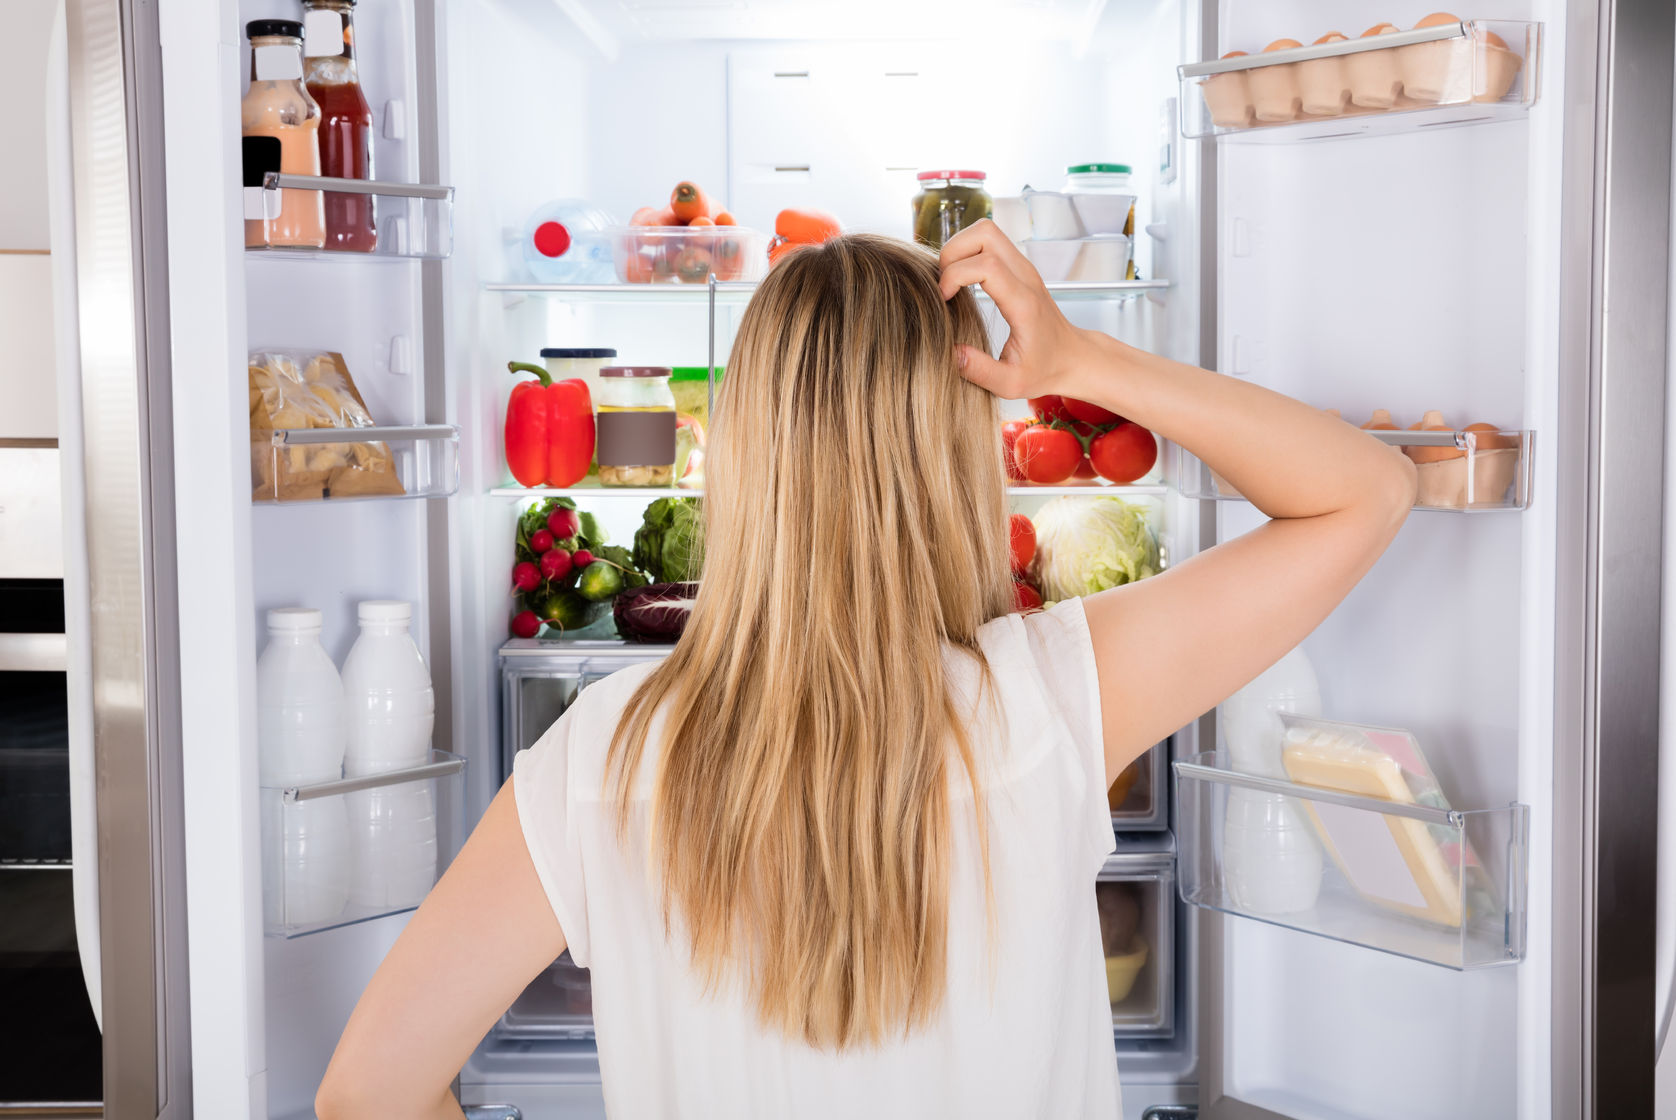 70309104 - rear view of young woman looking in fridge at kitchen